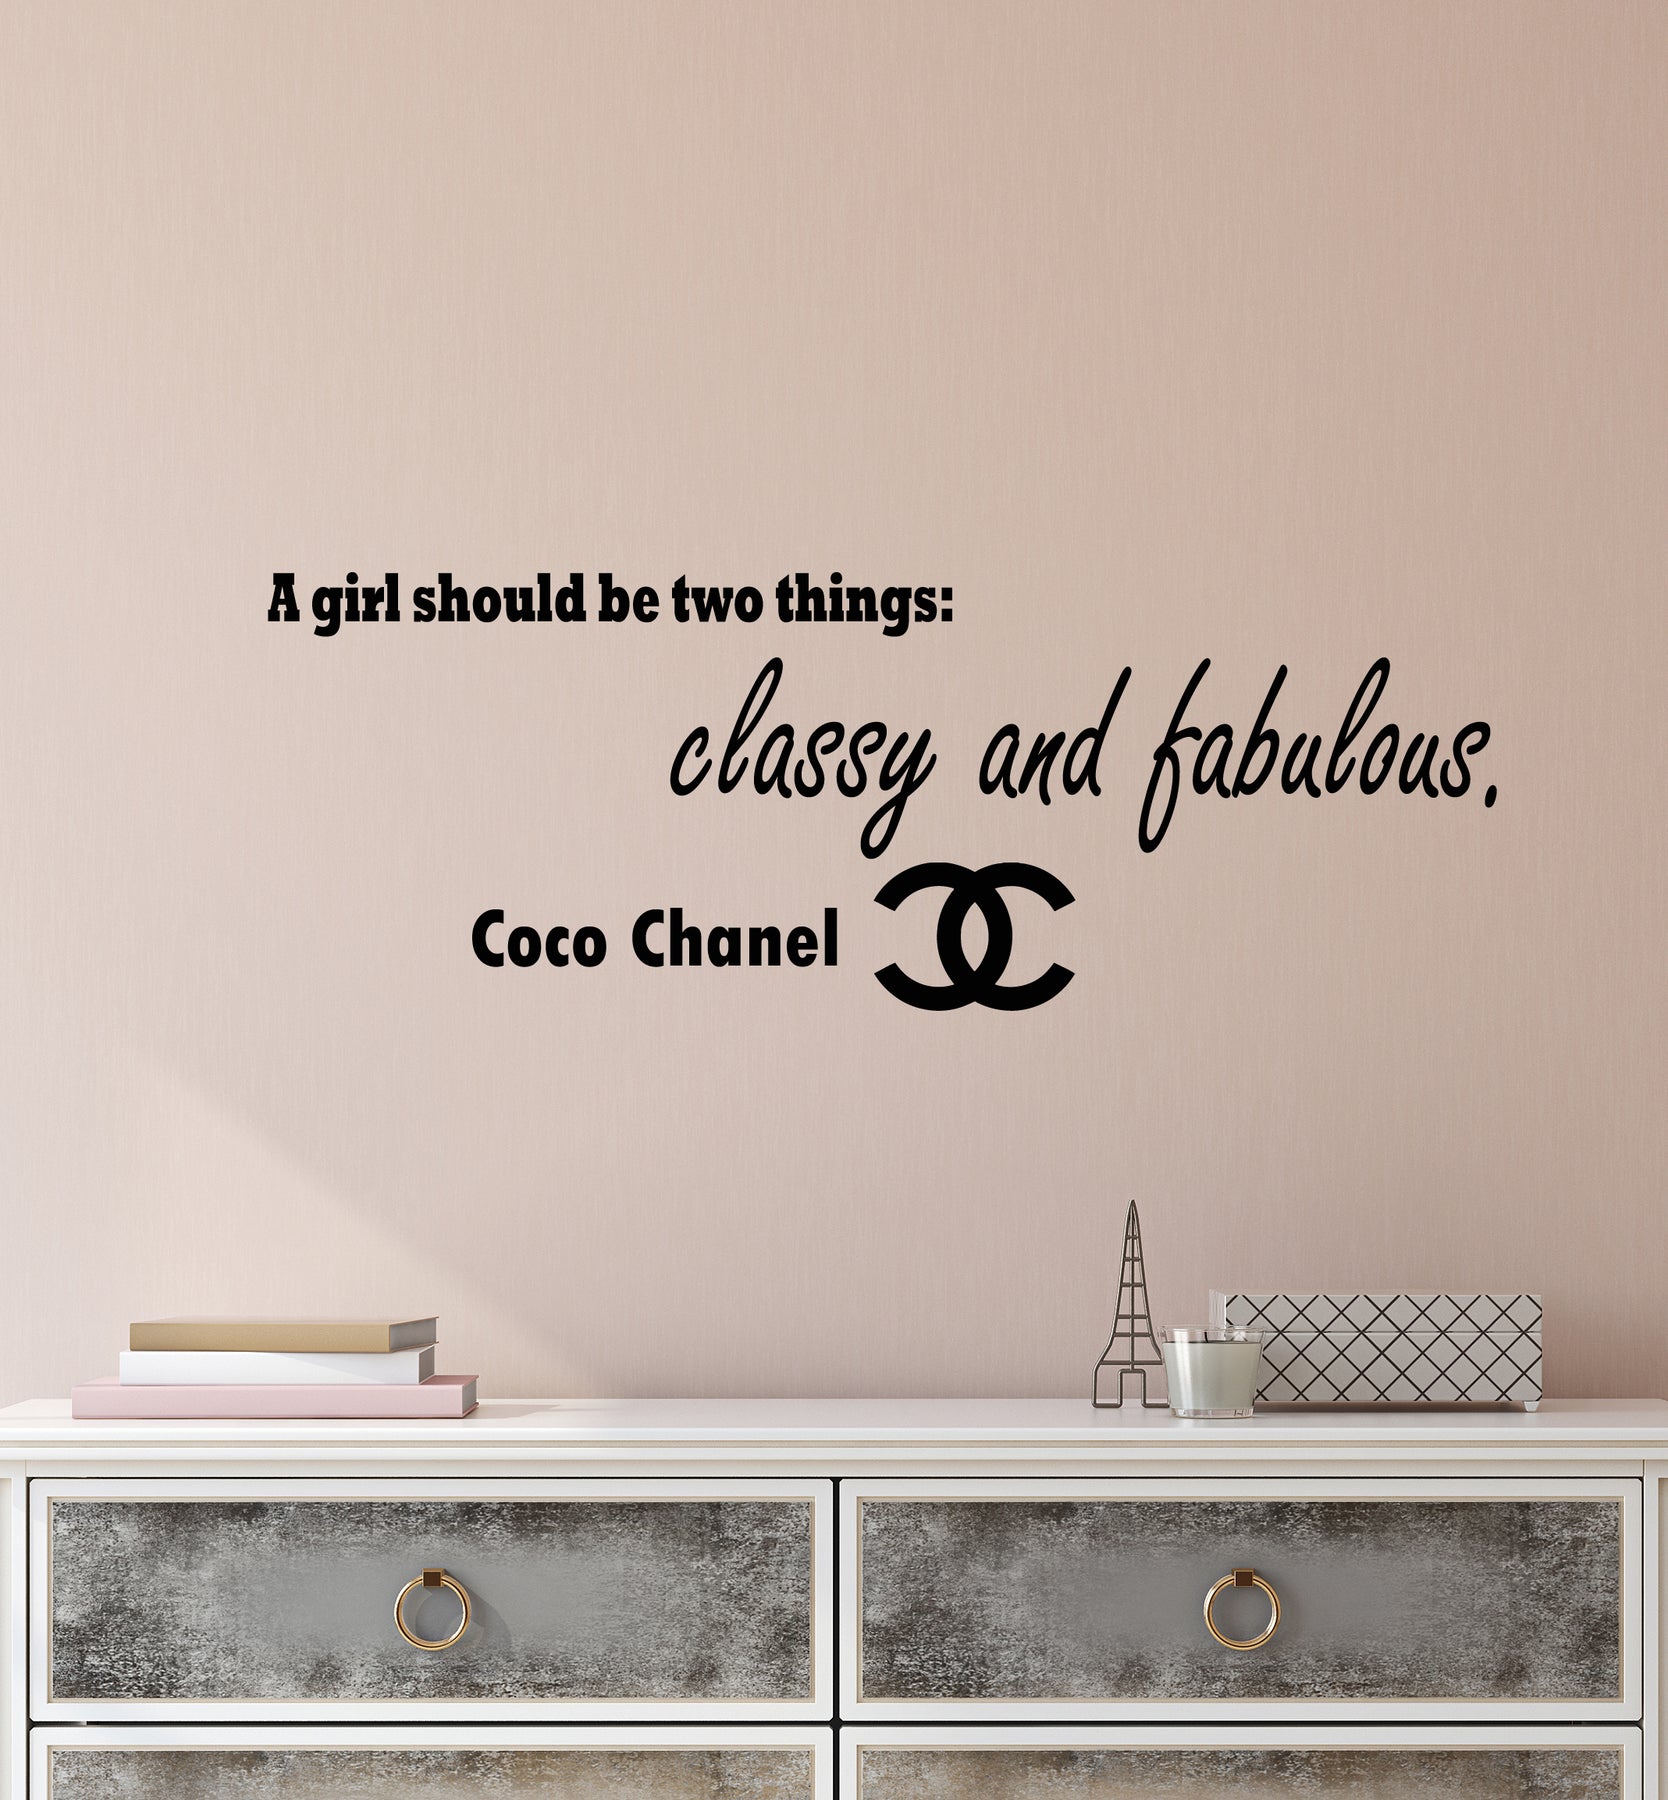 Beauty Quote Decal 